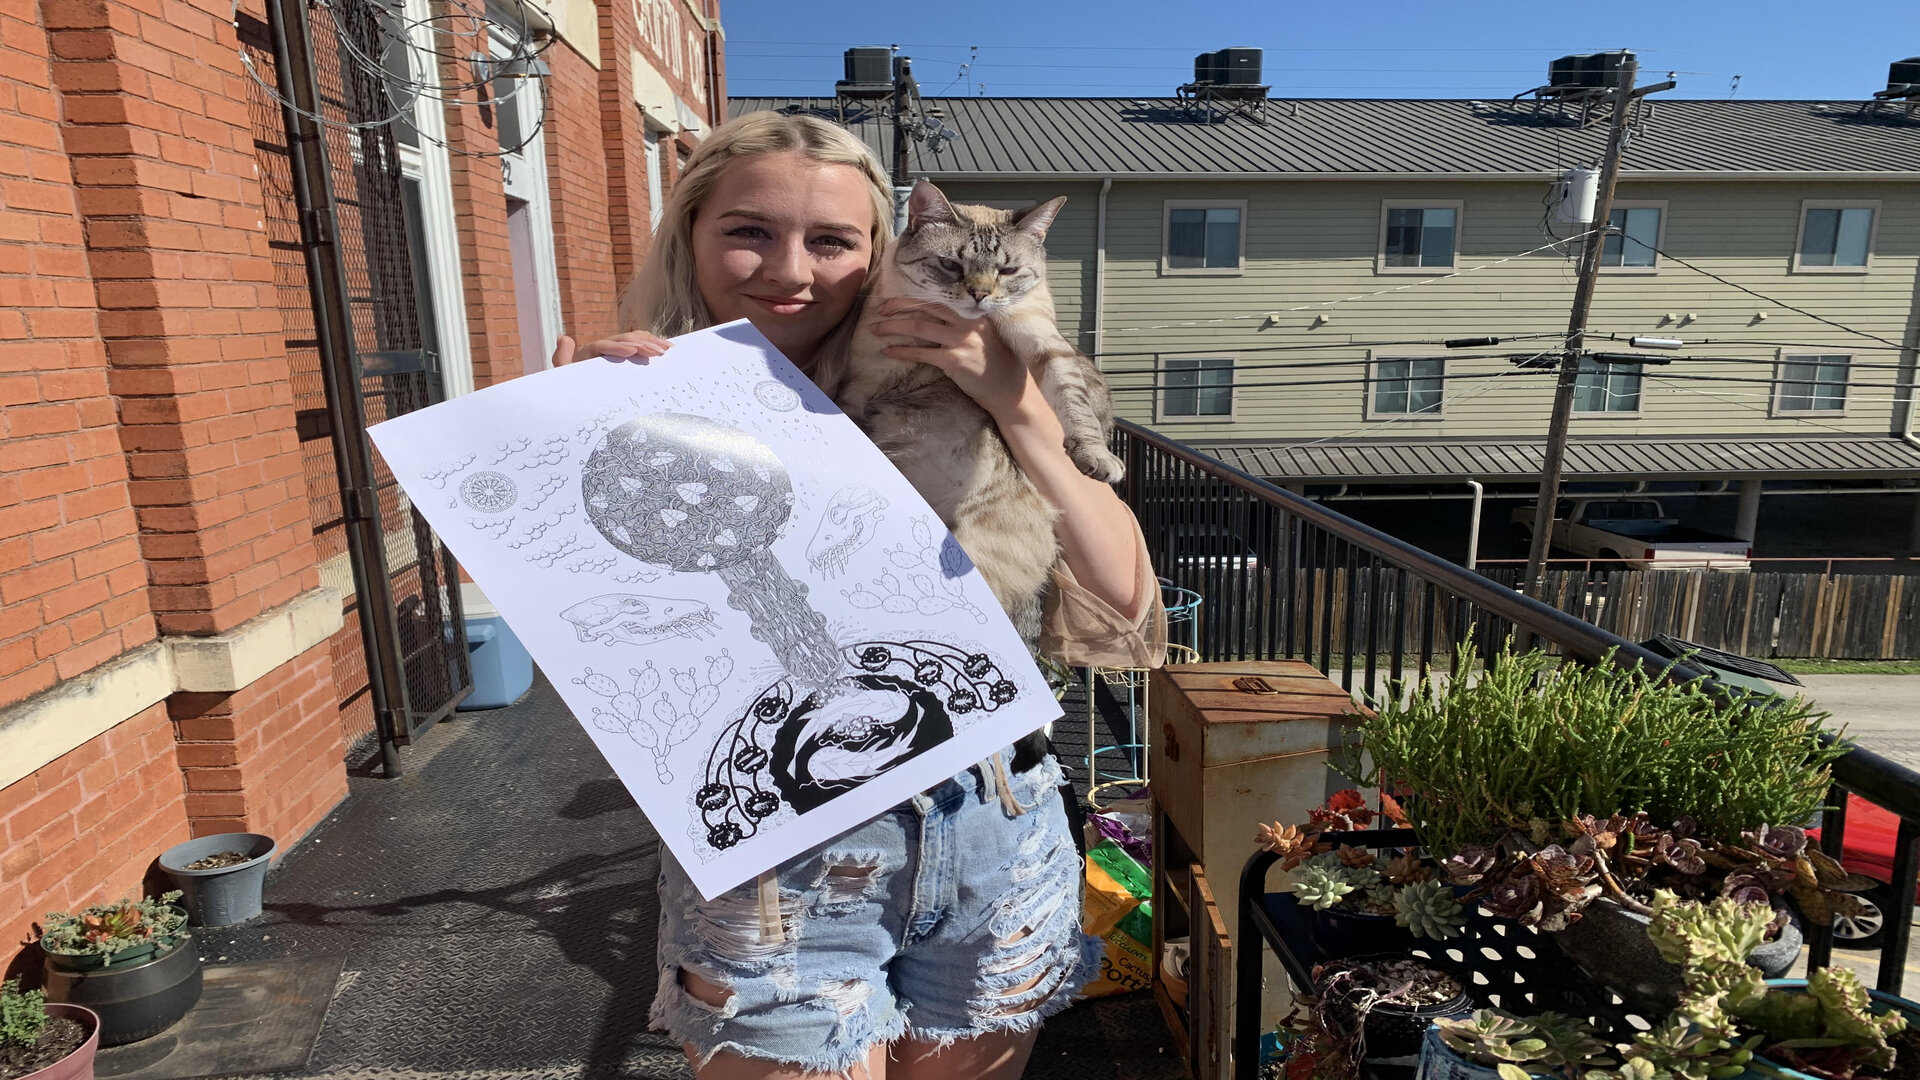 Phoebe Mau outside holding one of her art pieces and her cat, Mika